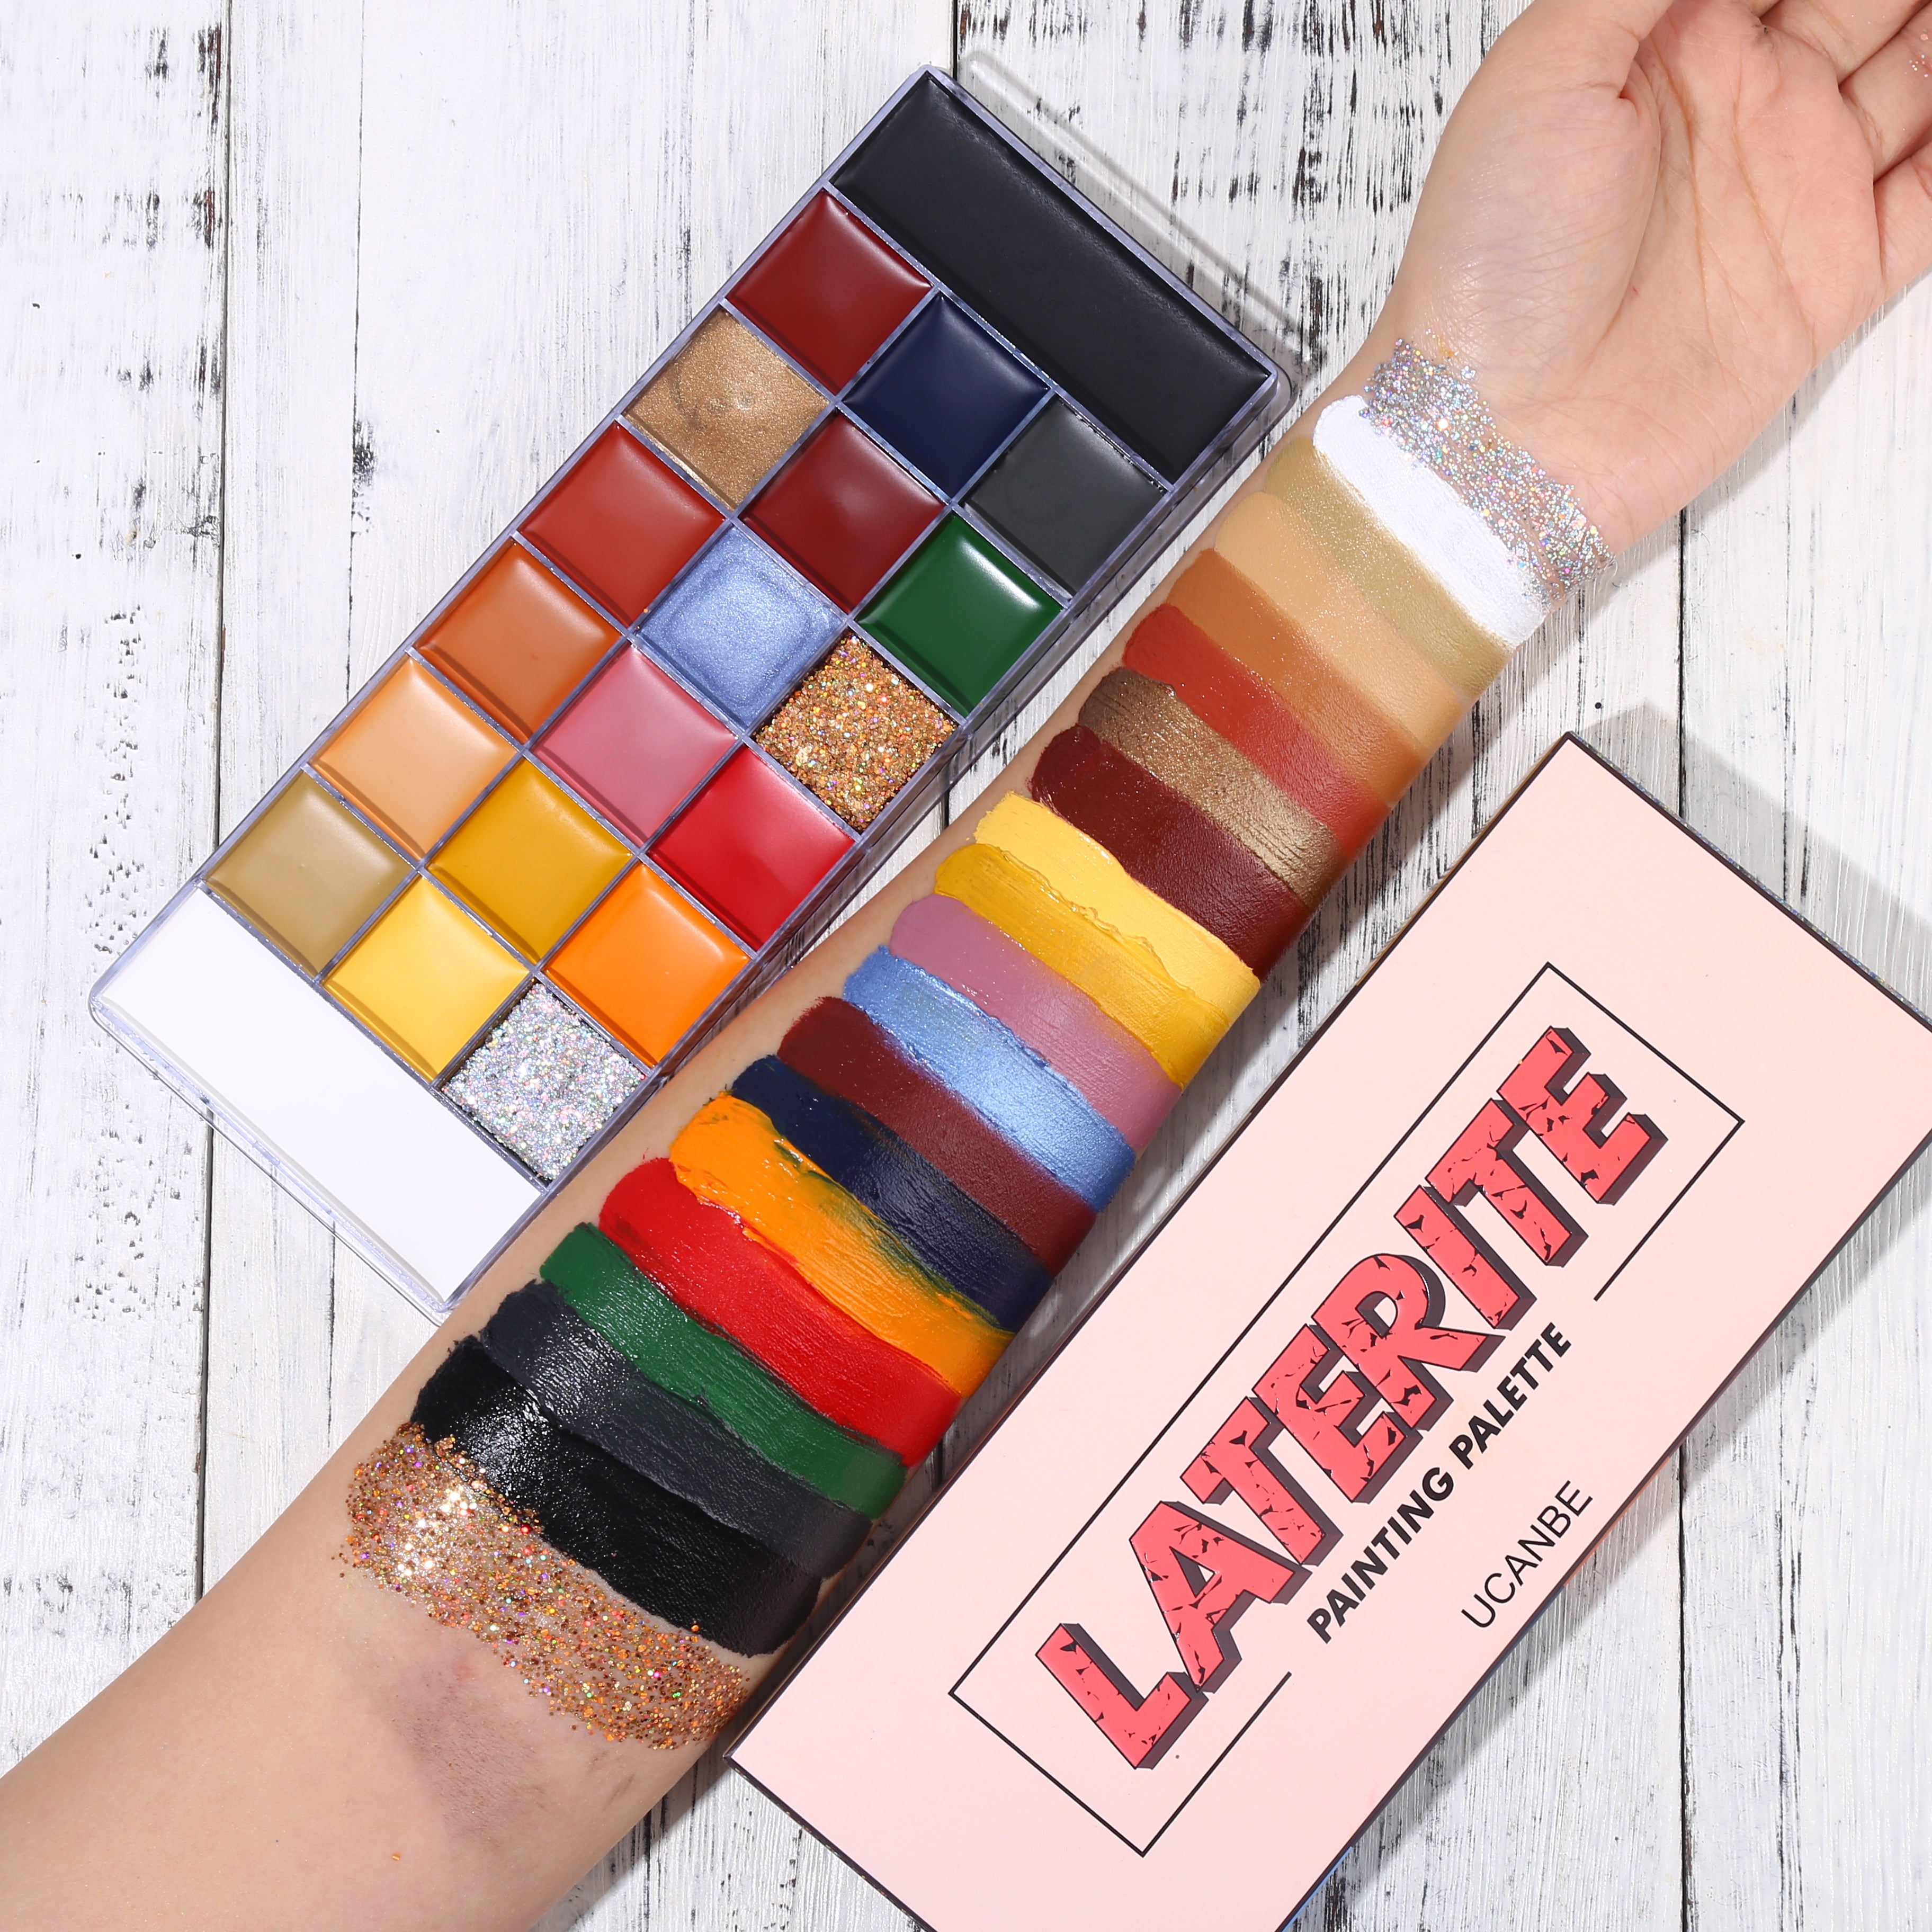 Laterite Painting Palette – UCANBE